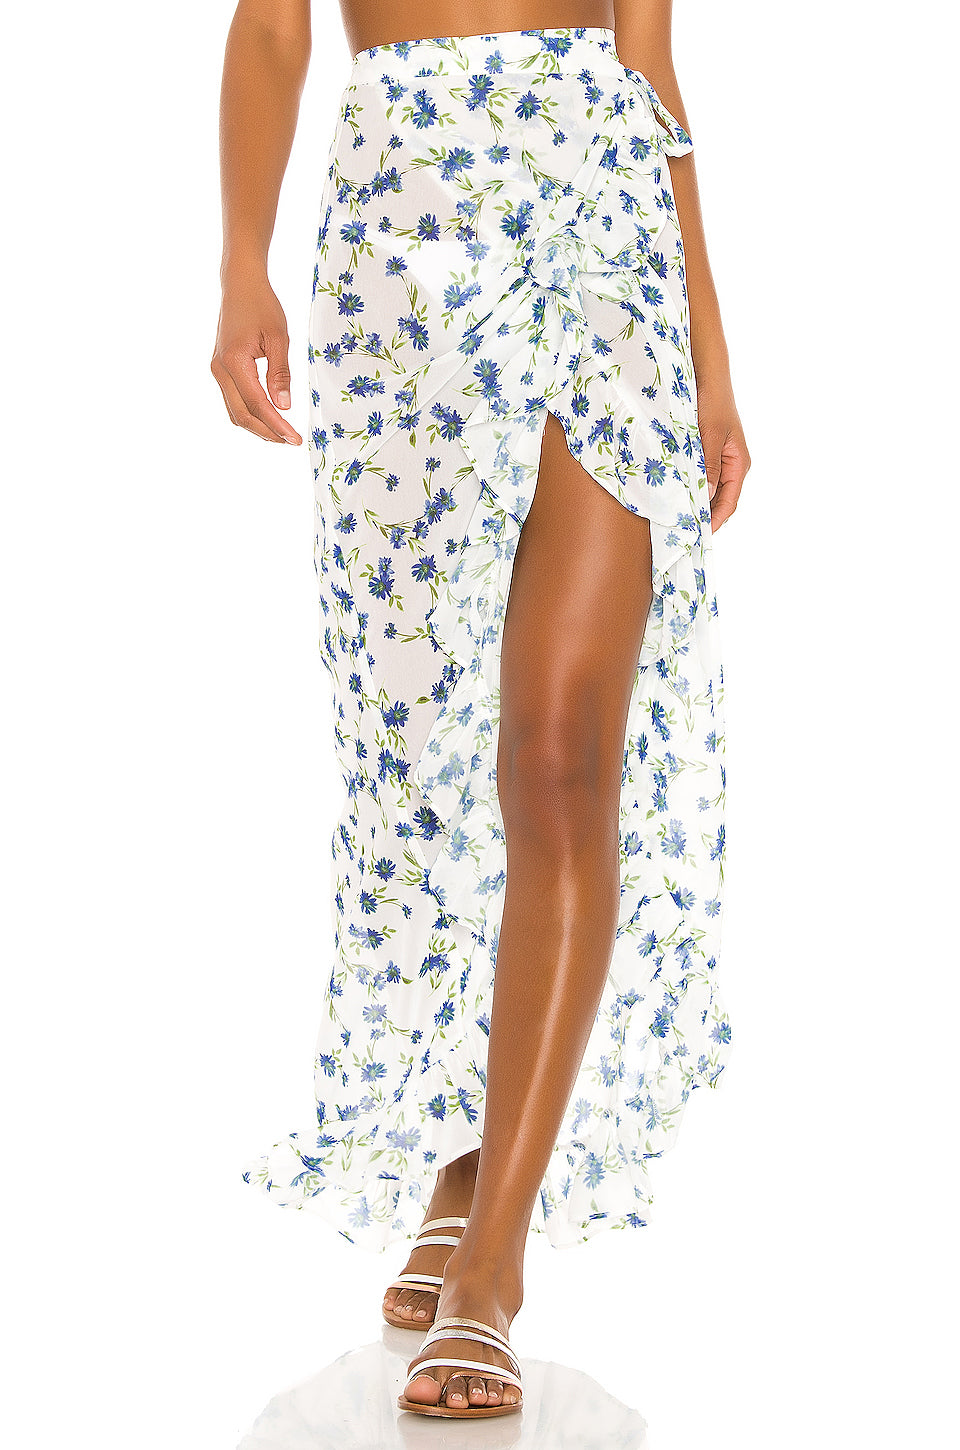 Nala Wrap Skirt in FORGET ME NOT FLORAL